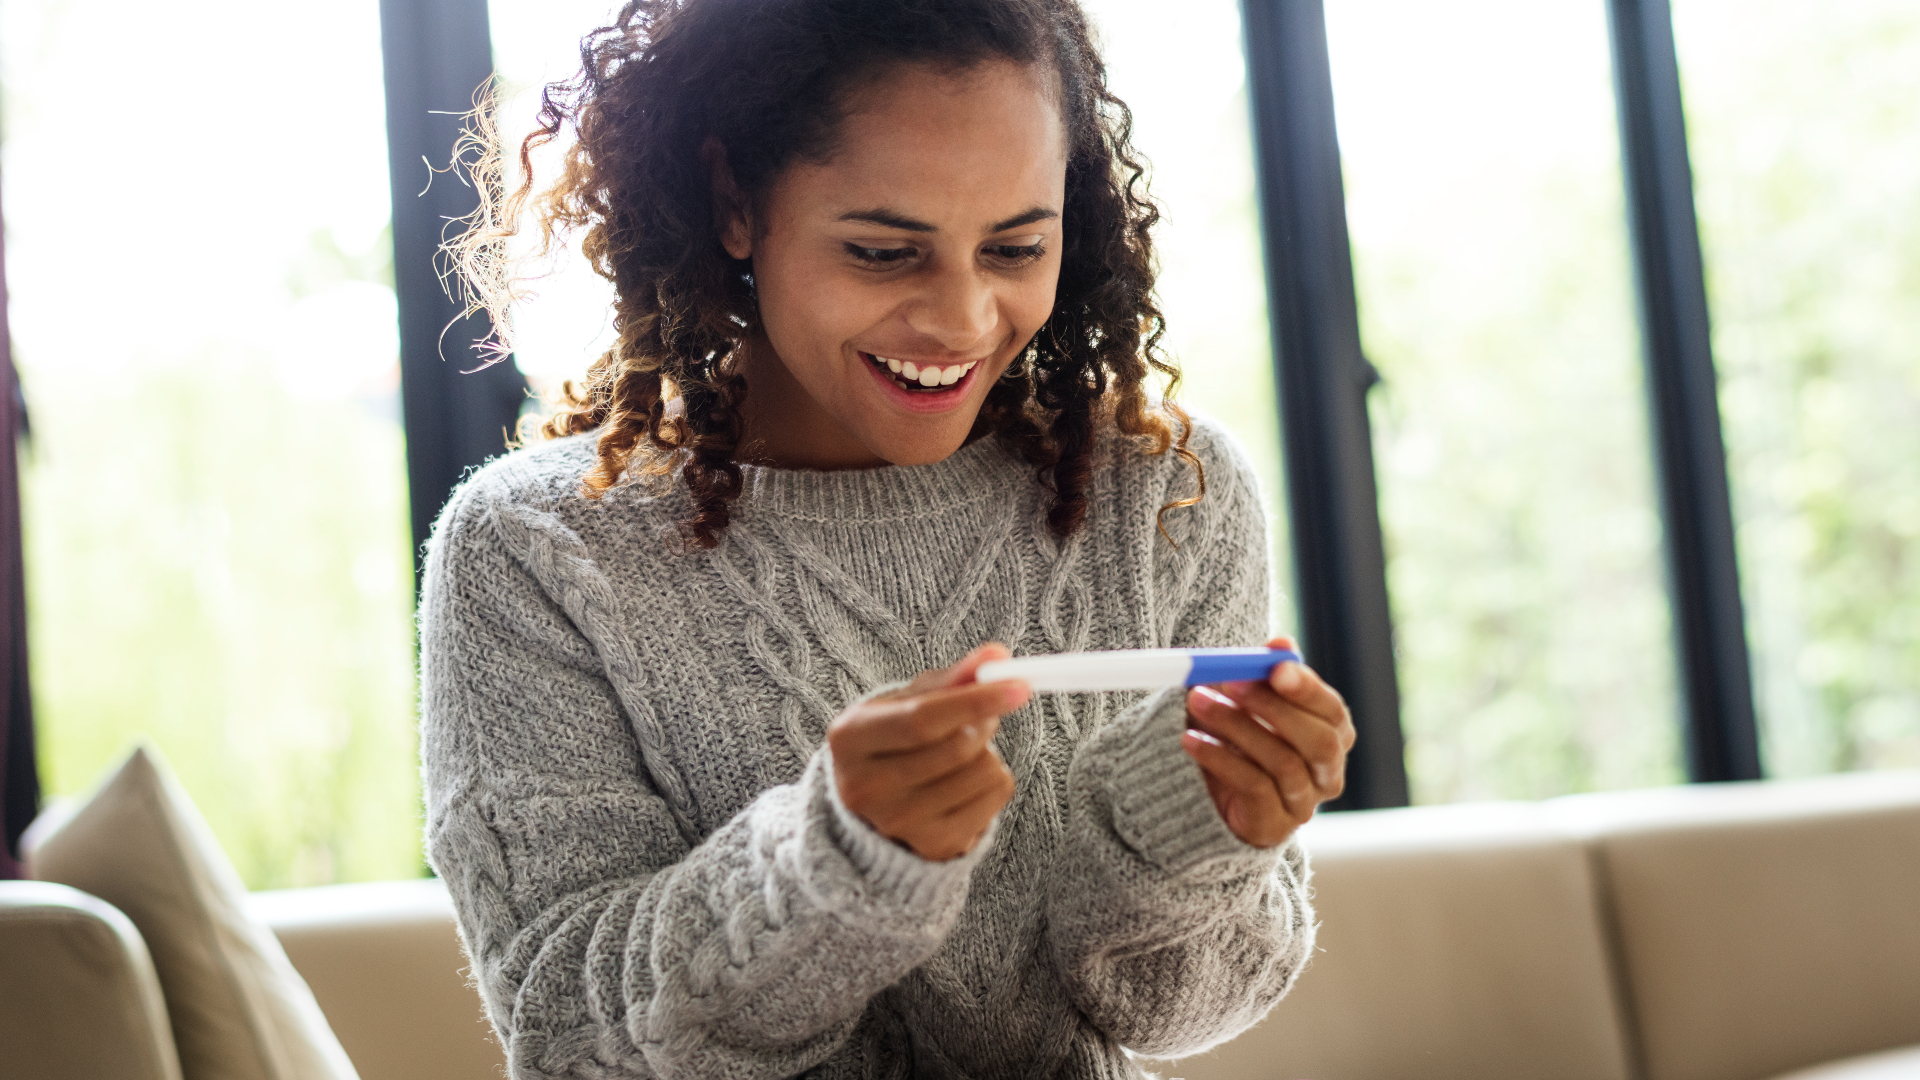 Fertility tips: 7 things that might increase your likelihood of